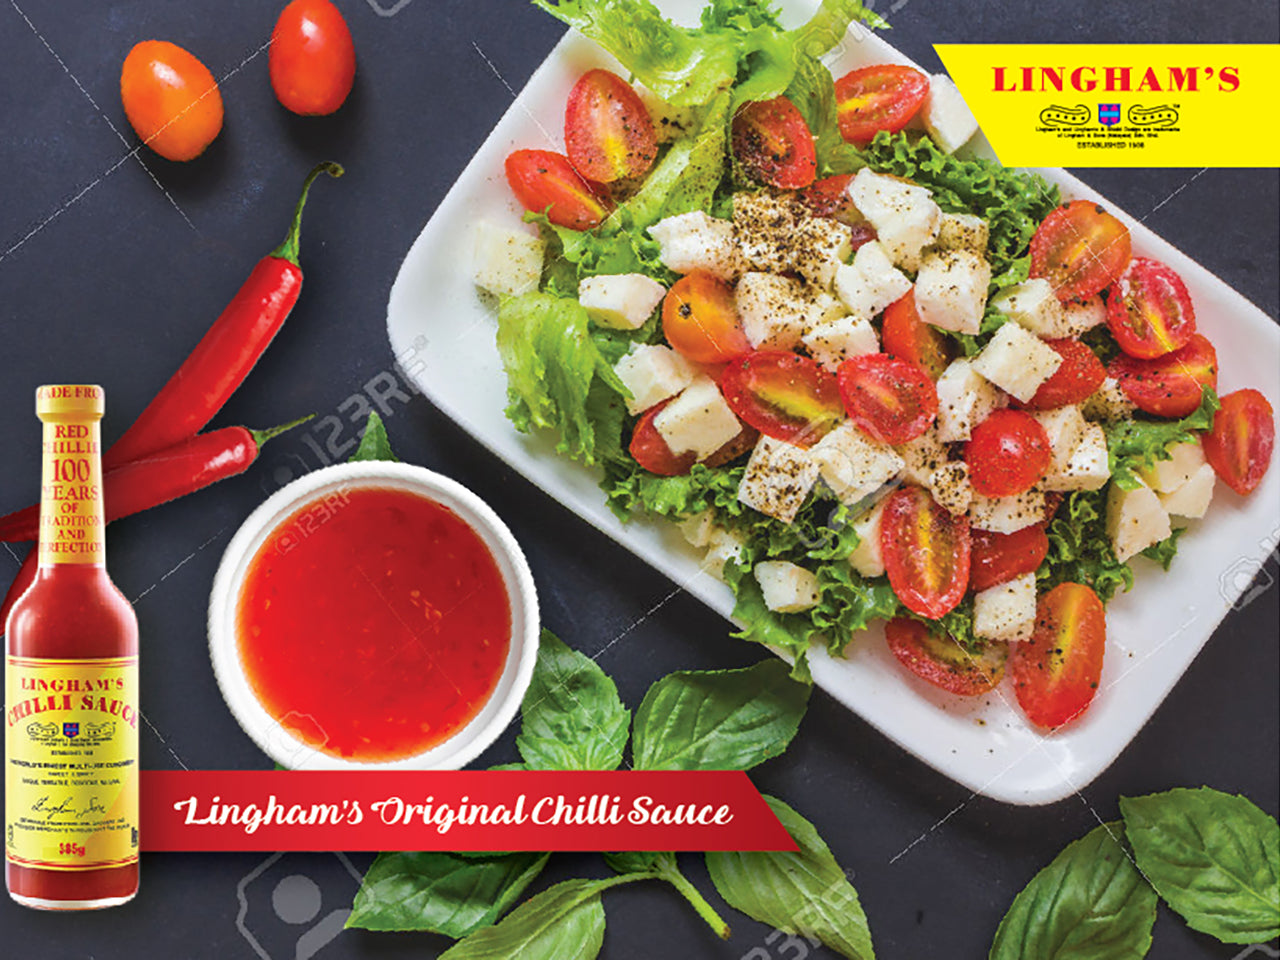 Lingham’s Spicy Peanut Butter Salad Dressing